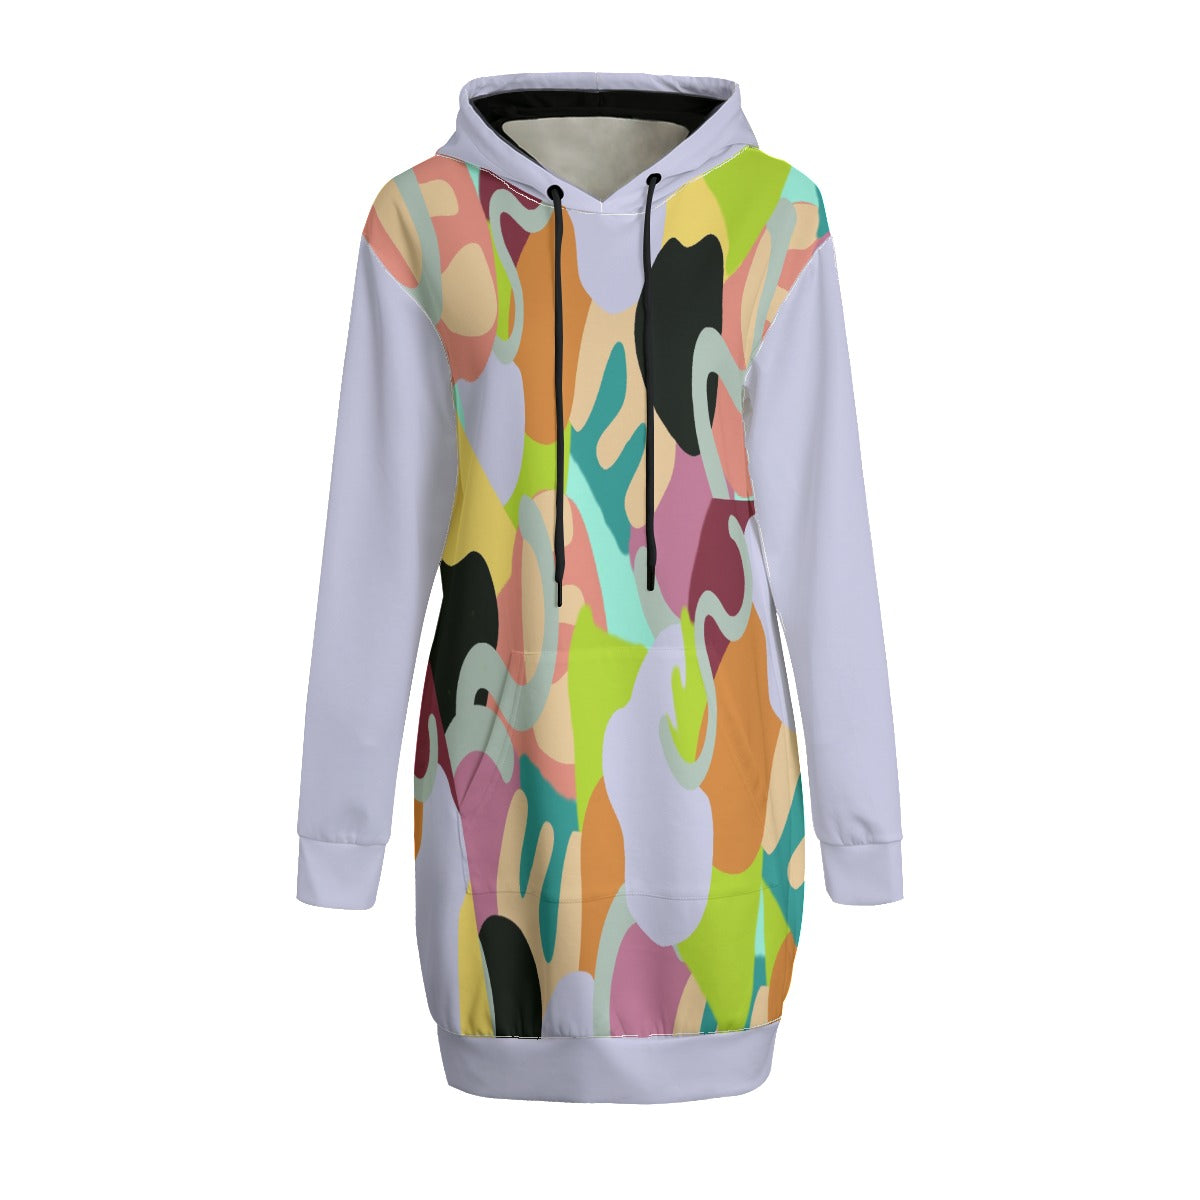 MULTI-COLORED Abstract Wild Women's Hoodie Dress | Interlock - women's hoodie dress at TFC&H Co.